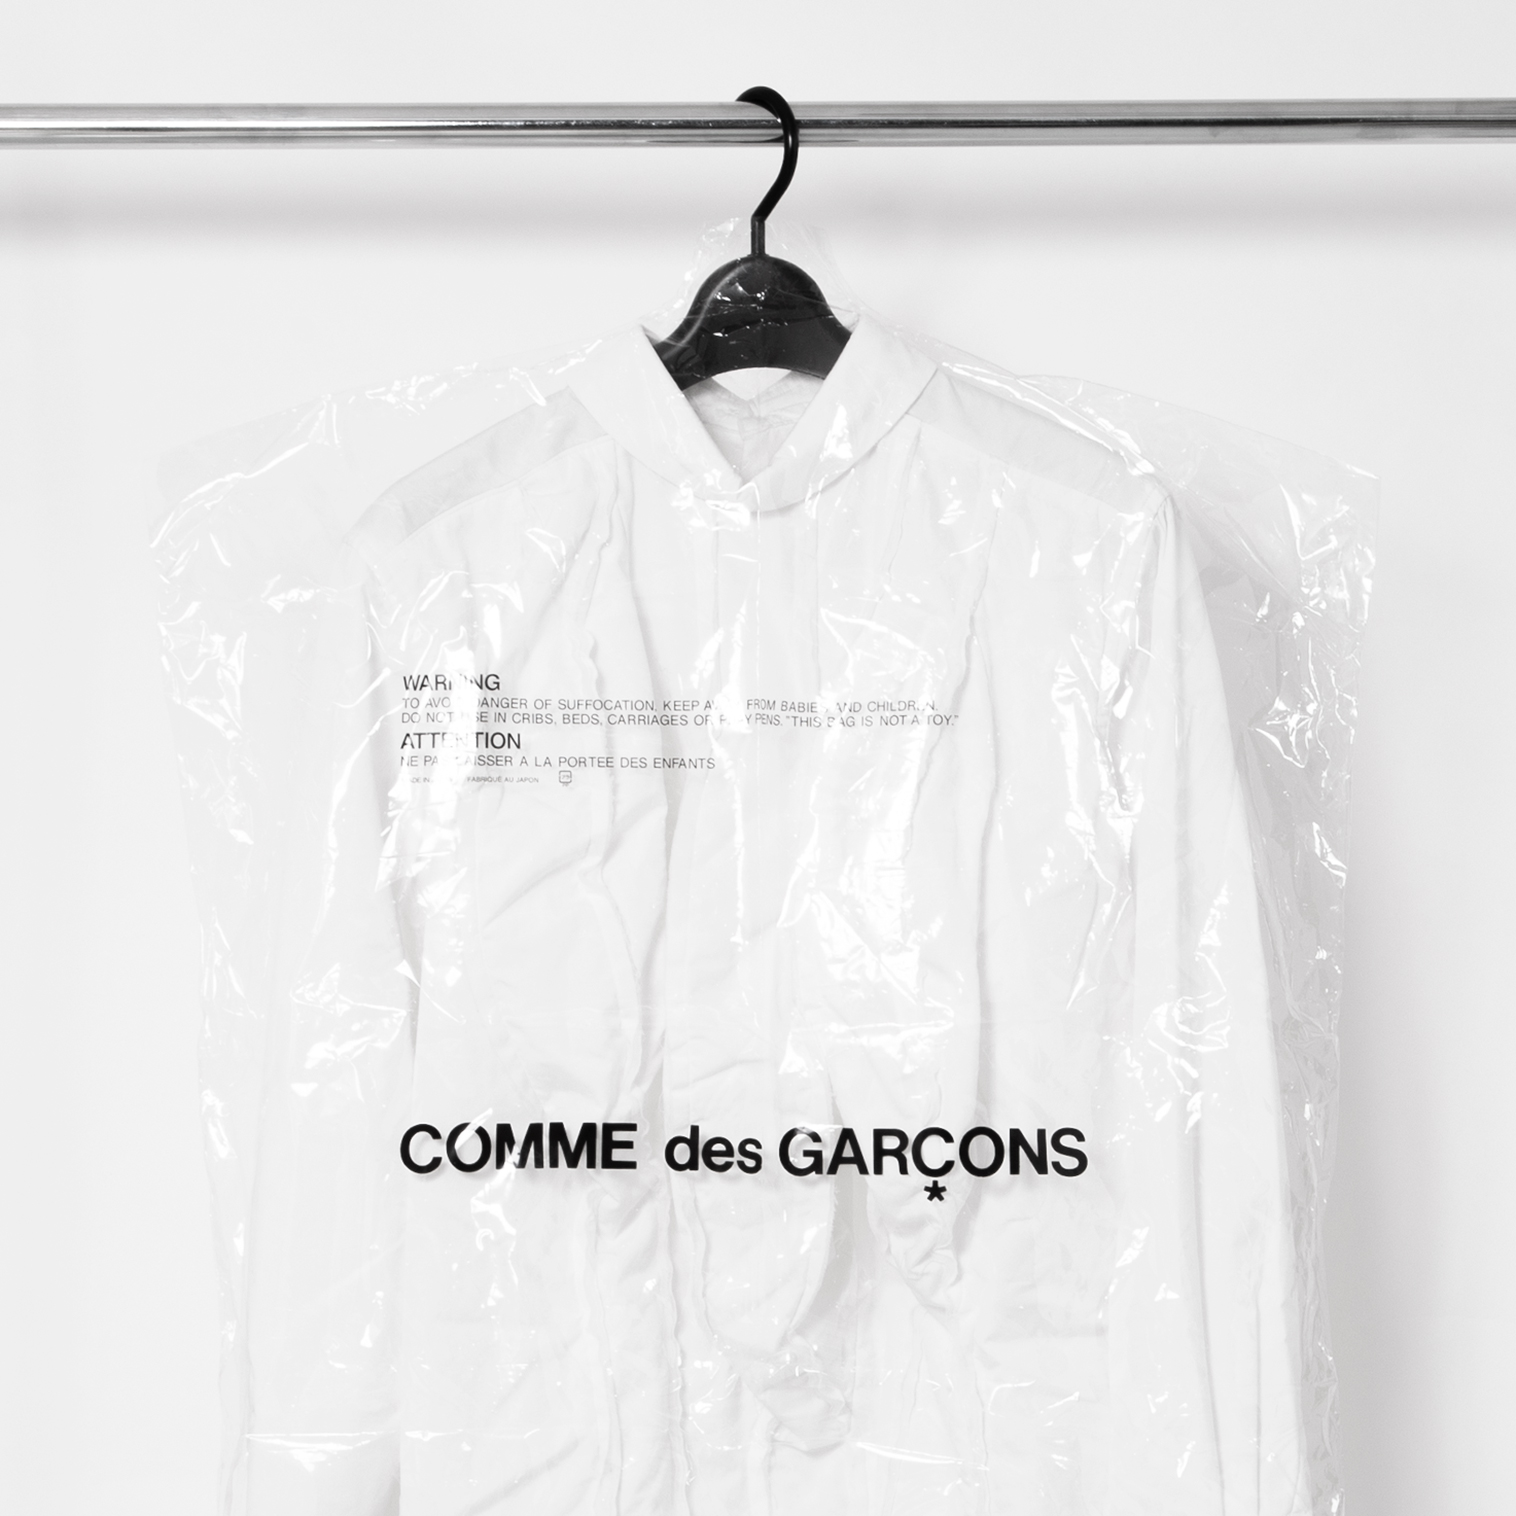 HOW TO GET THE INFORMATION FROM THE QUALITY LABEL FOR COMME DES GARCONS